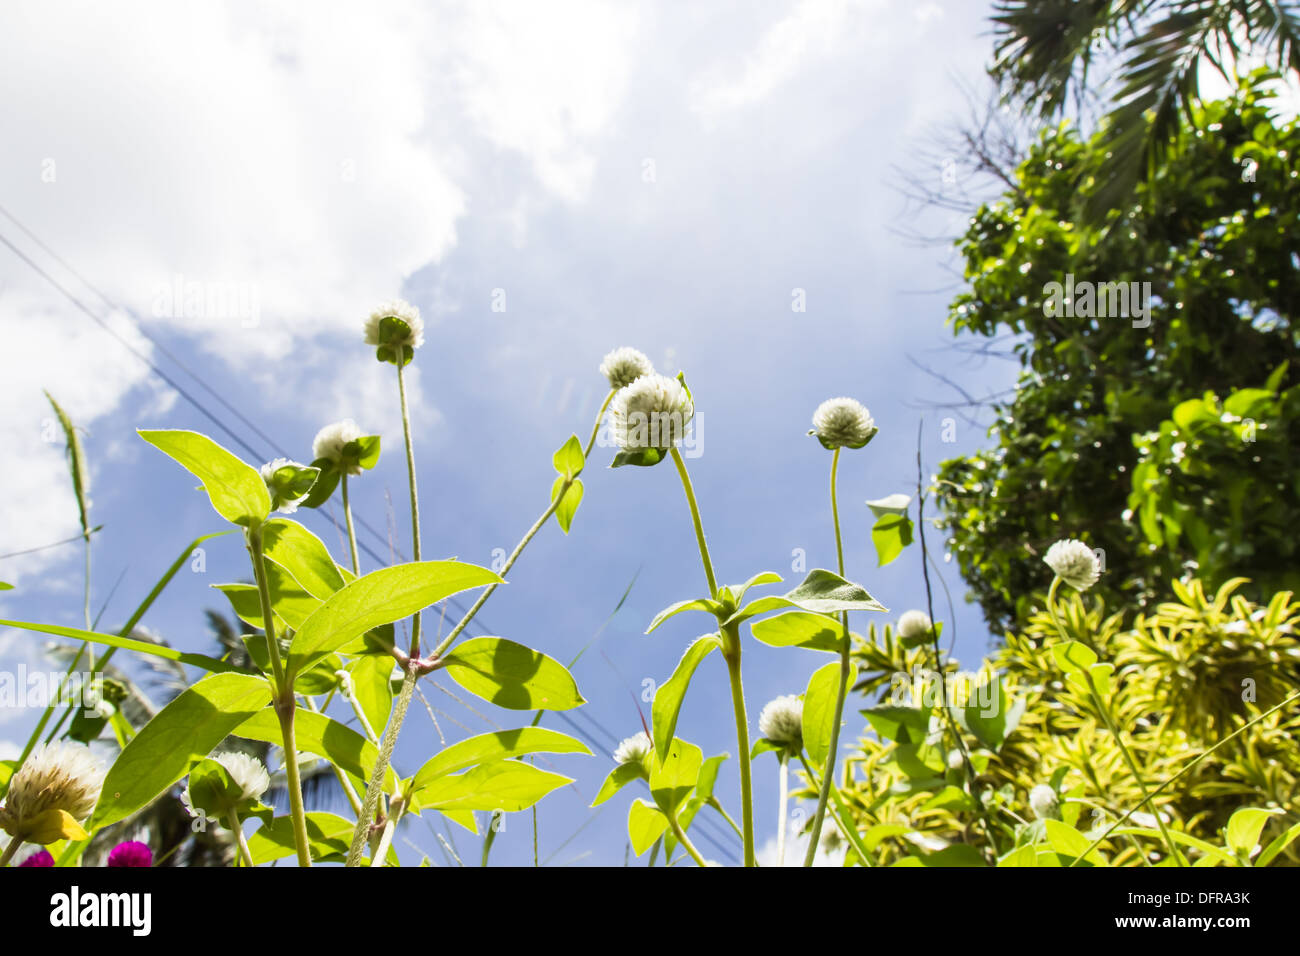 White globe amaranth or bachelor button flower and blue sky. Stock Photo